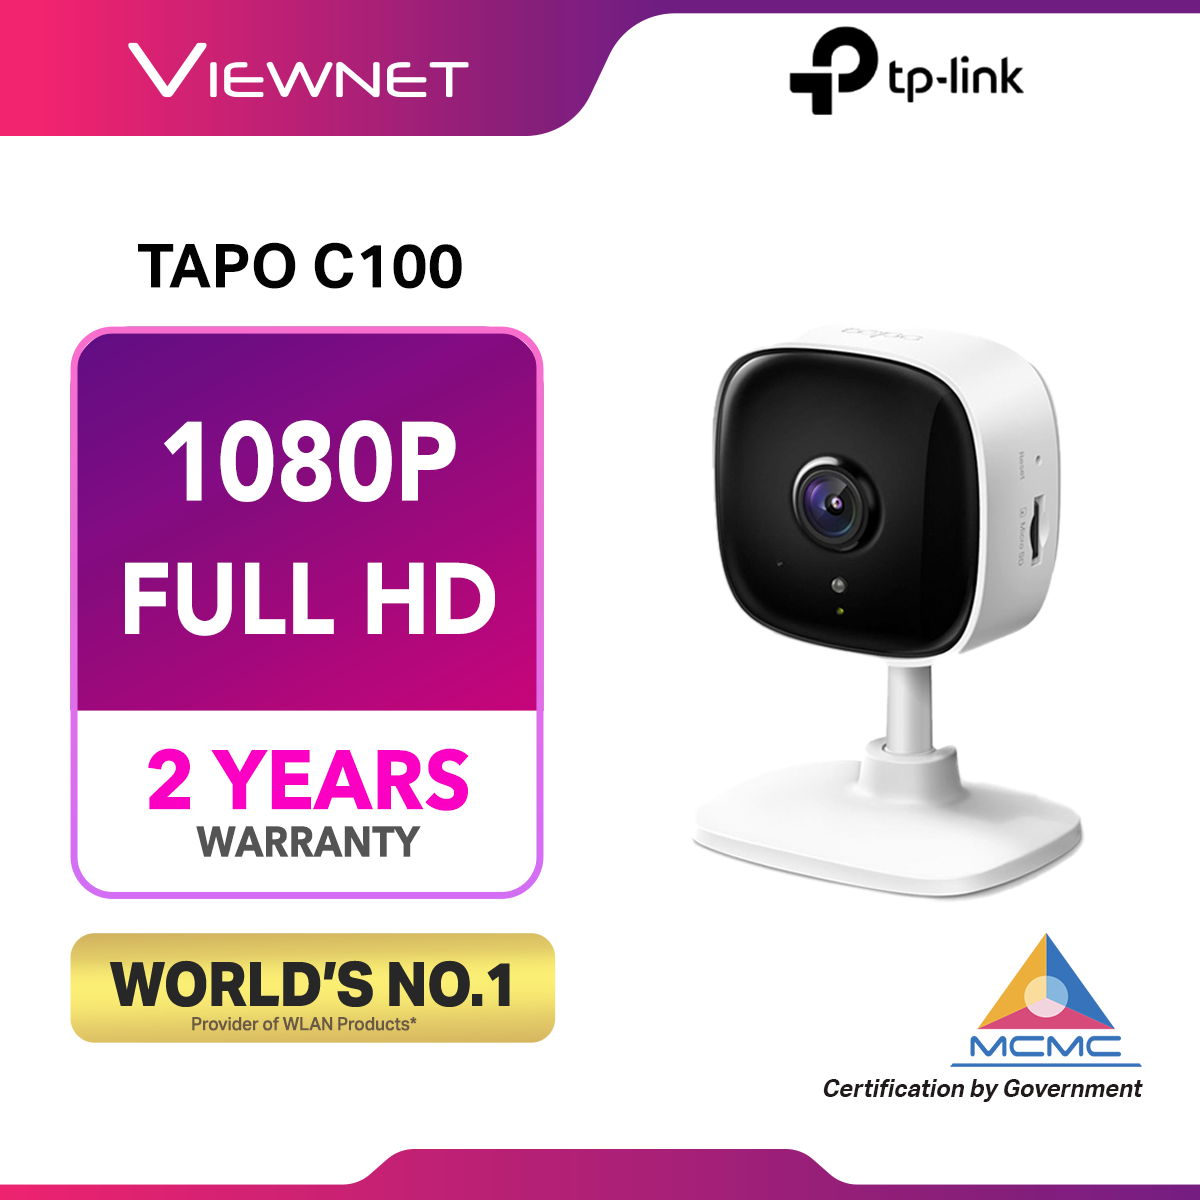 TP-Link Tapo C100 - 1080P Full HD CCTV WIFI Camera with Amazon Safety CLOUD and Sirim Certification Tapo C110